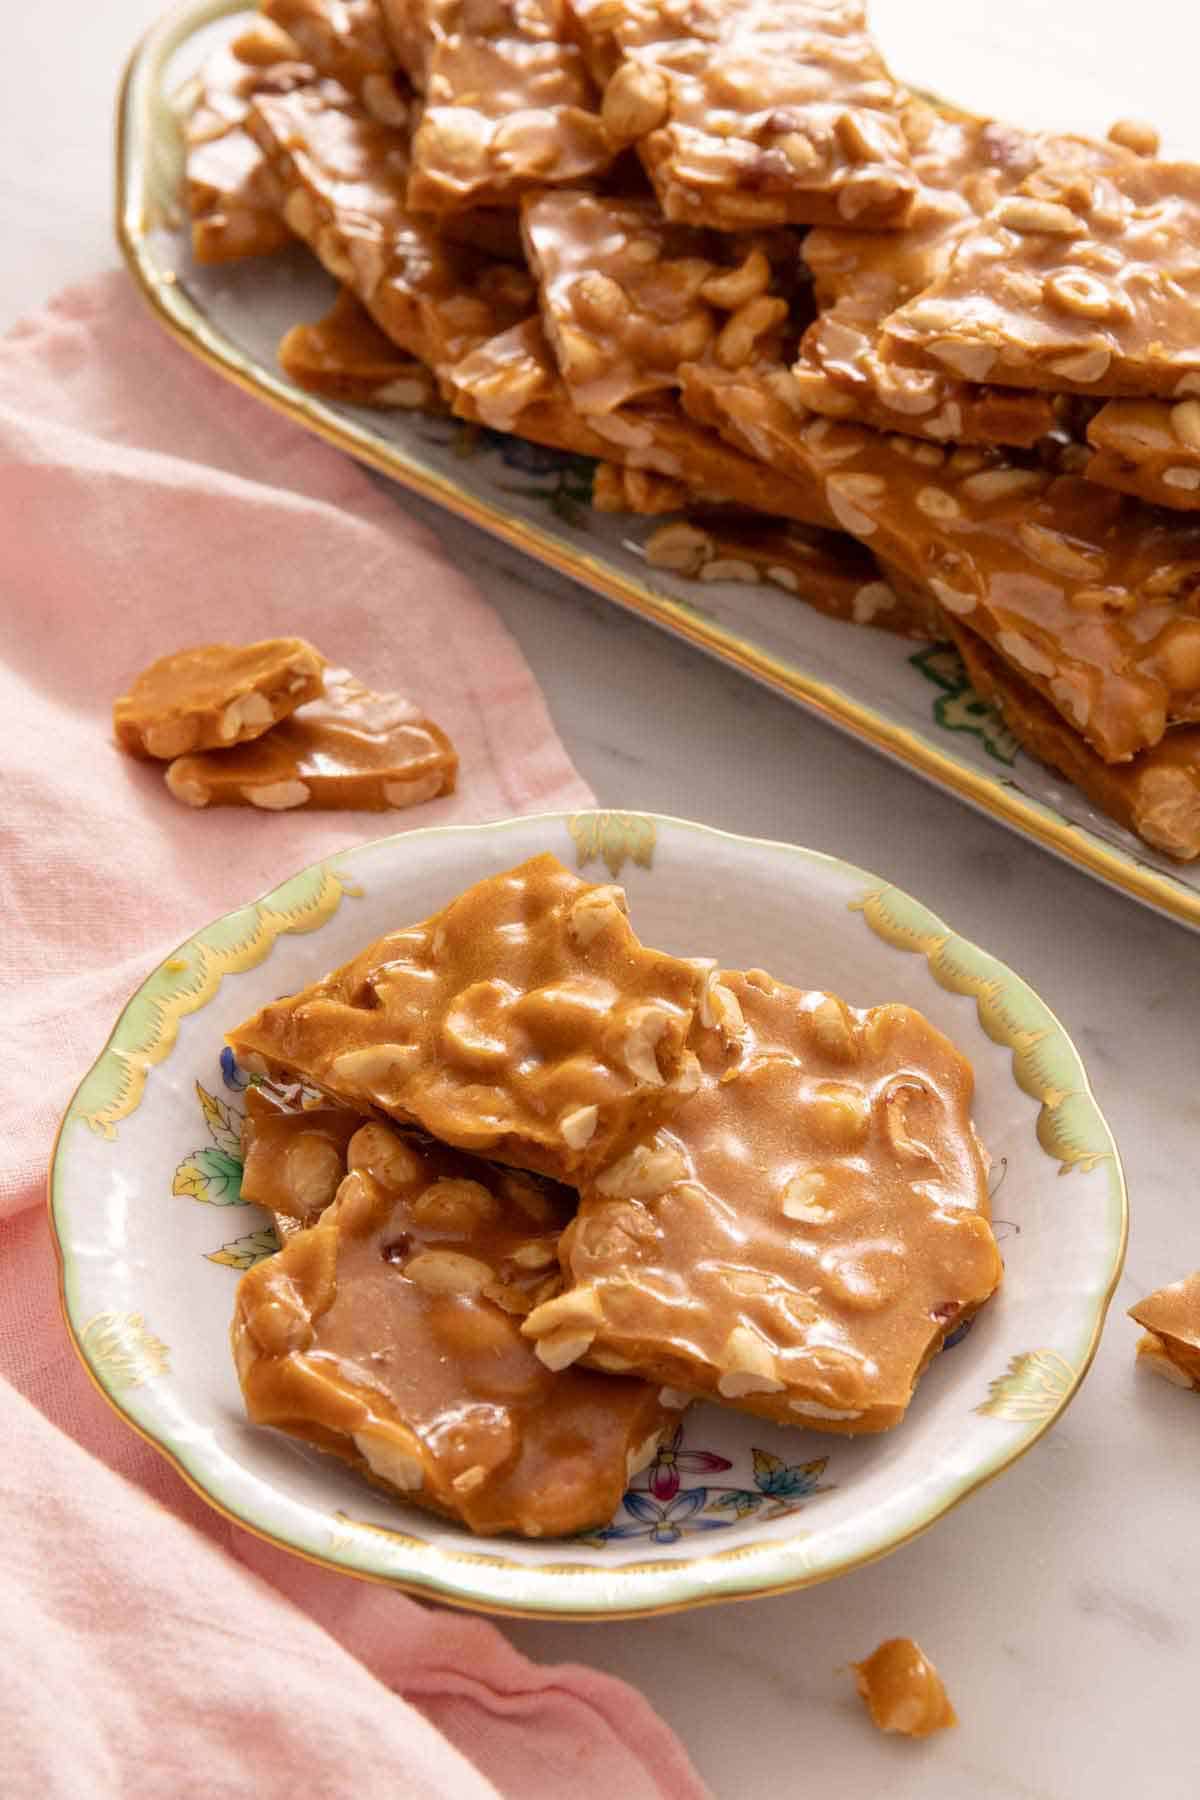 A plate of peanut brittle with a platter with more in the background.